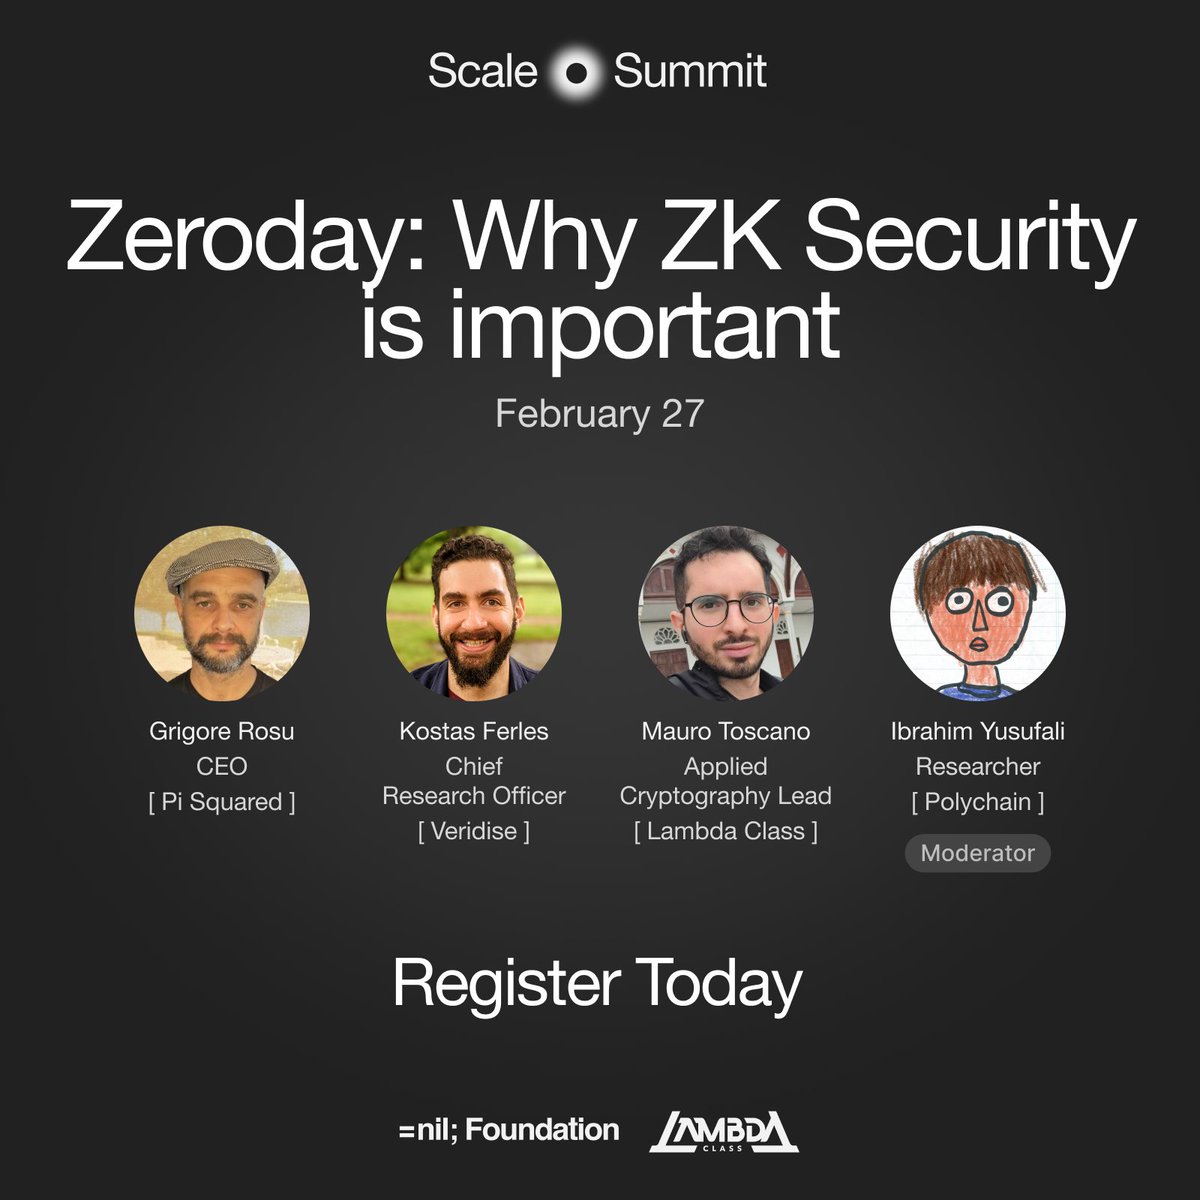 Kicking-off session announcements for Scale Summit at @EthereumDenver. Explore the latest insights on zk security at the 'Zeroday: Why ZK Security is Important' panel.

Featuring @RosuGrigore, @MauroToscanoDev, @kferles

Moderated by @ityusufali  

Tues, Feb 27

Panel Time: